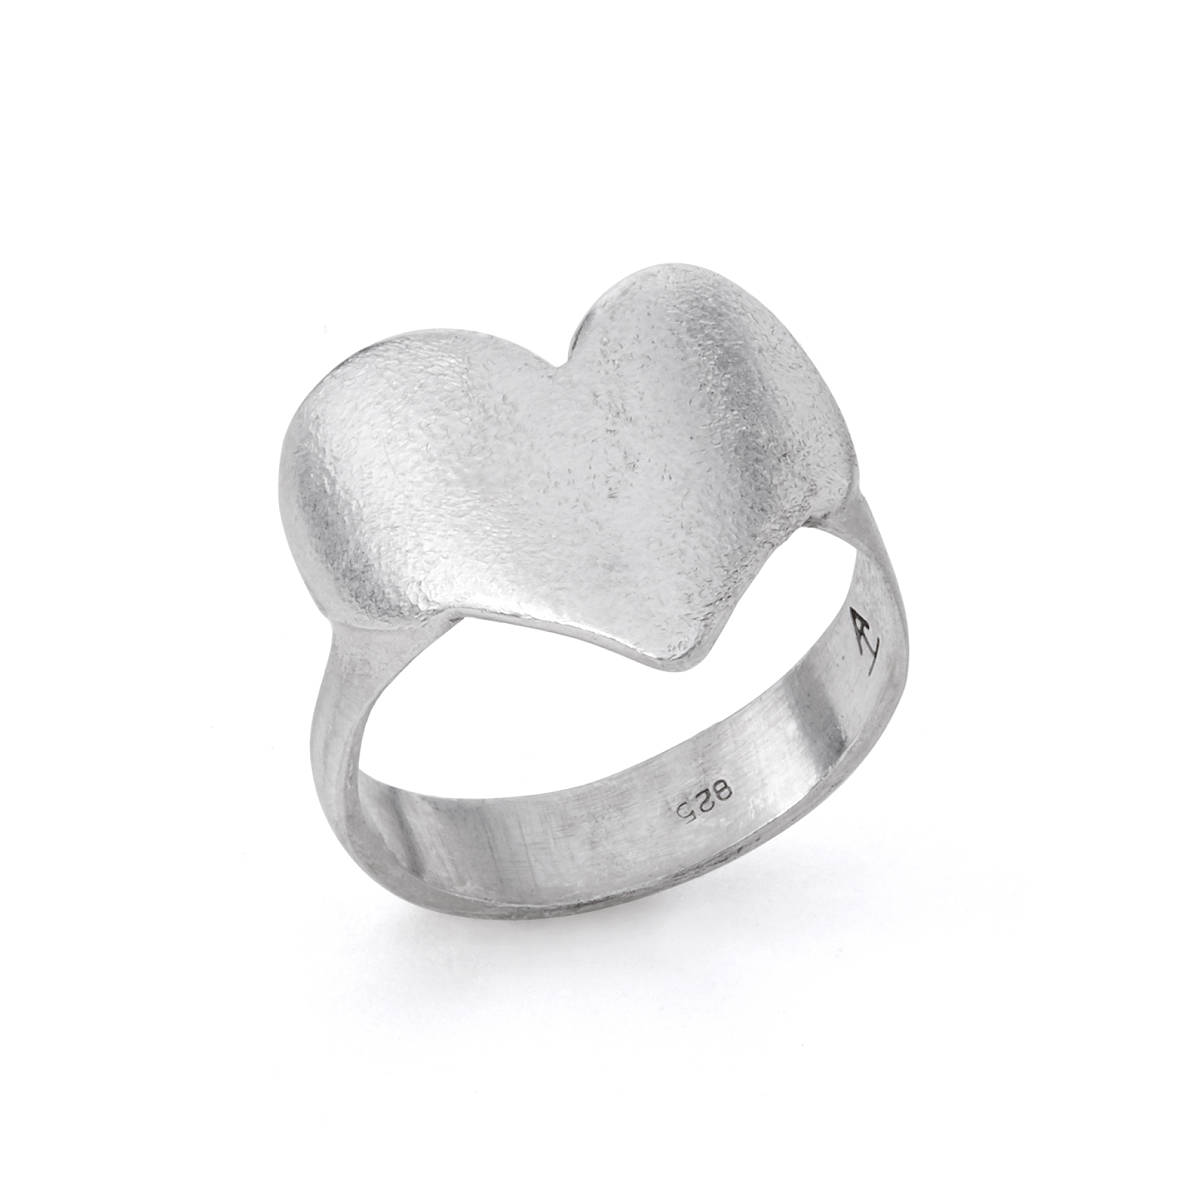 Love At First Sight Heart Ring | Inspirational Jewelry, Silver ...